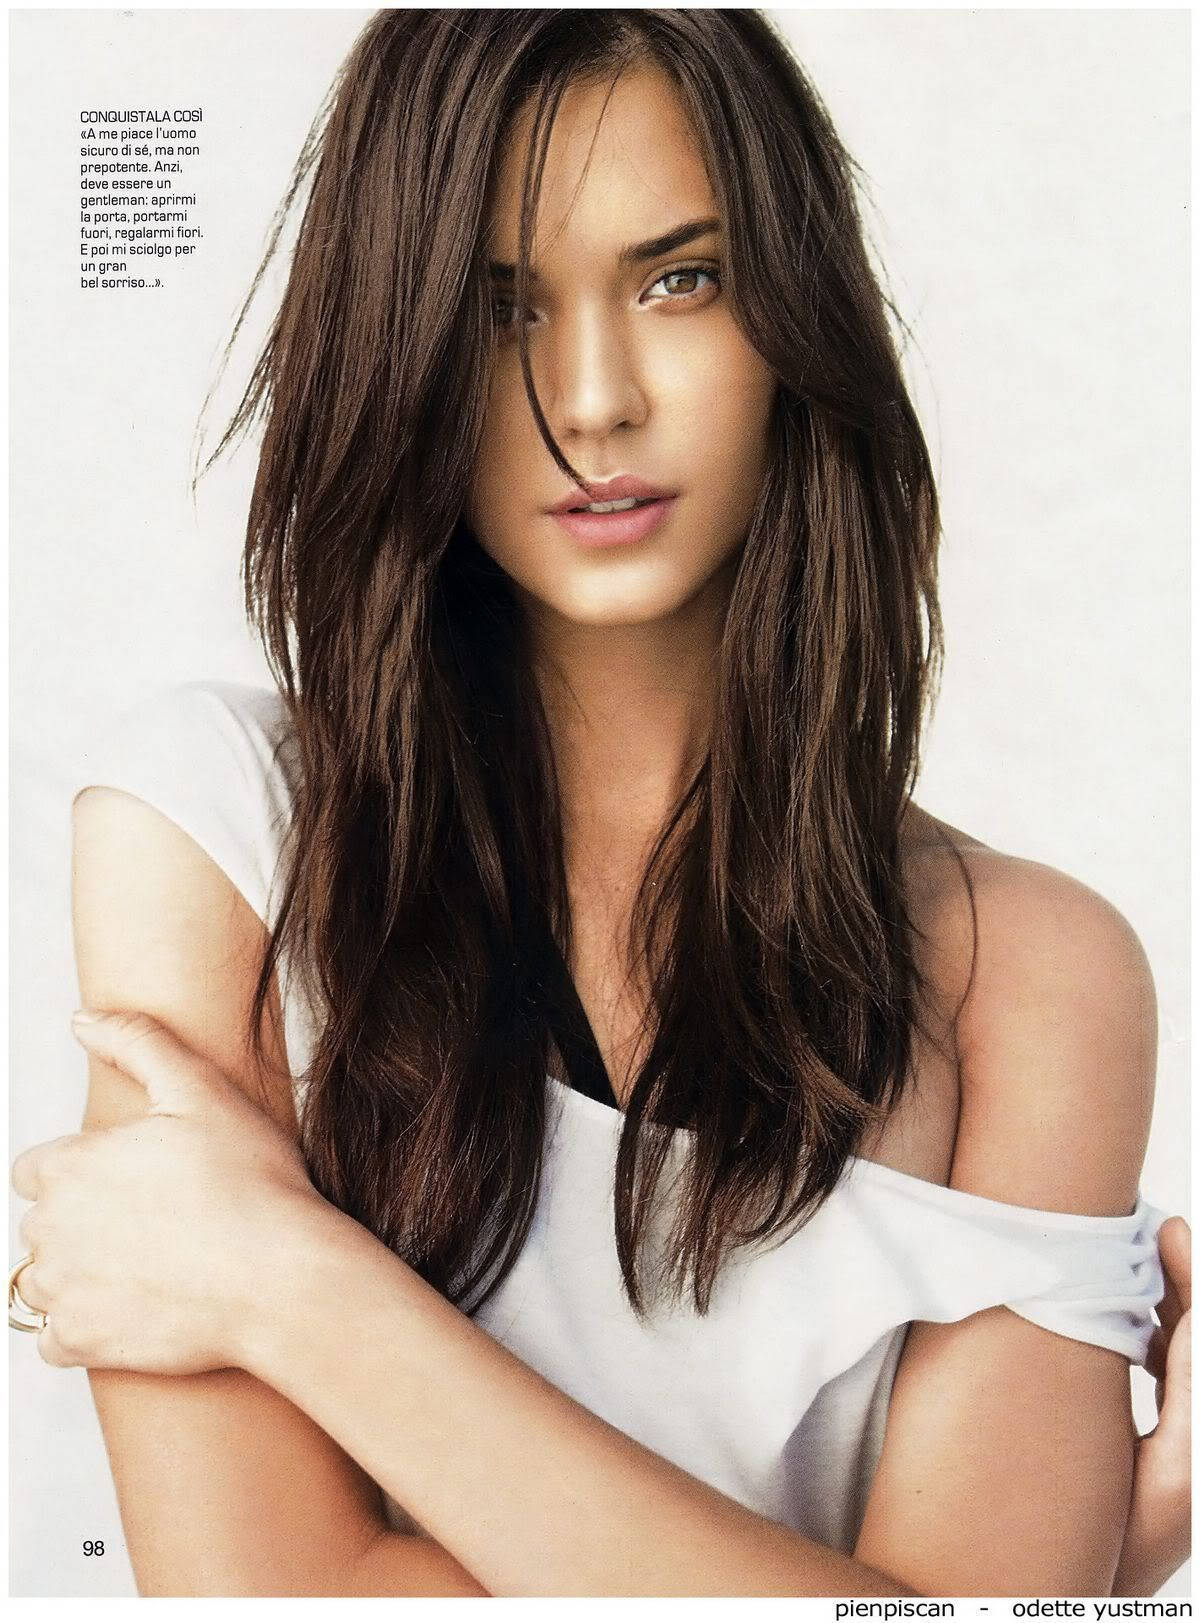 deirdre kinsella recommends Odette Annable Hot